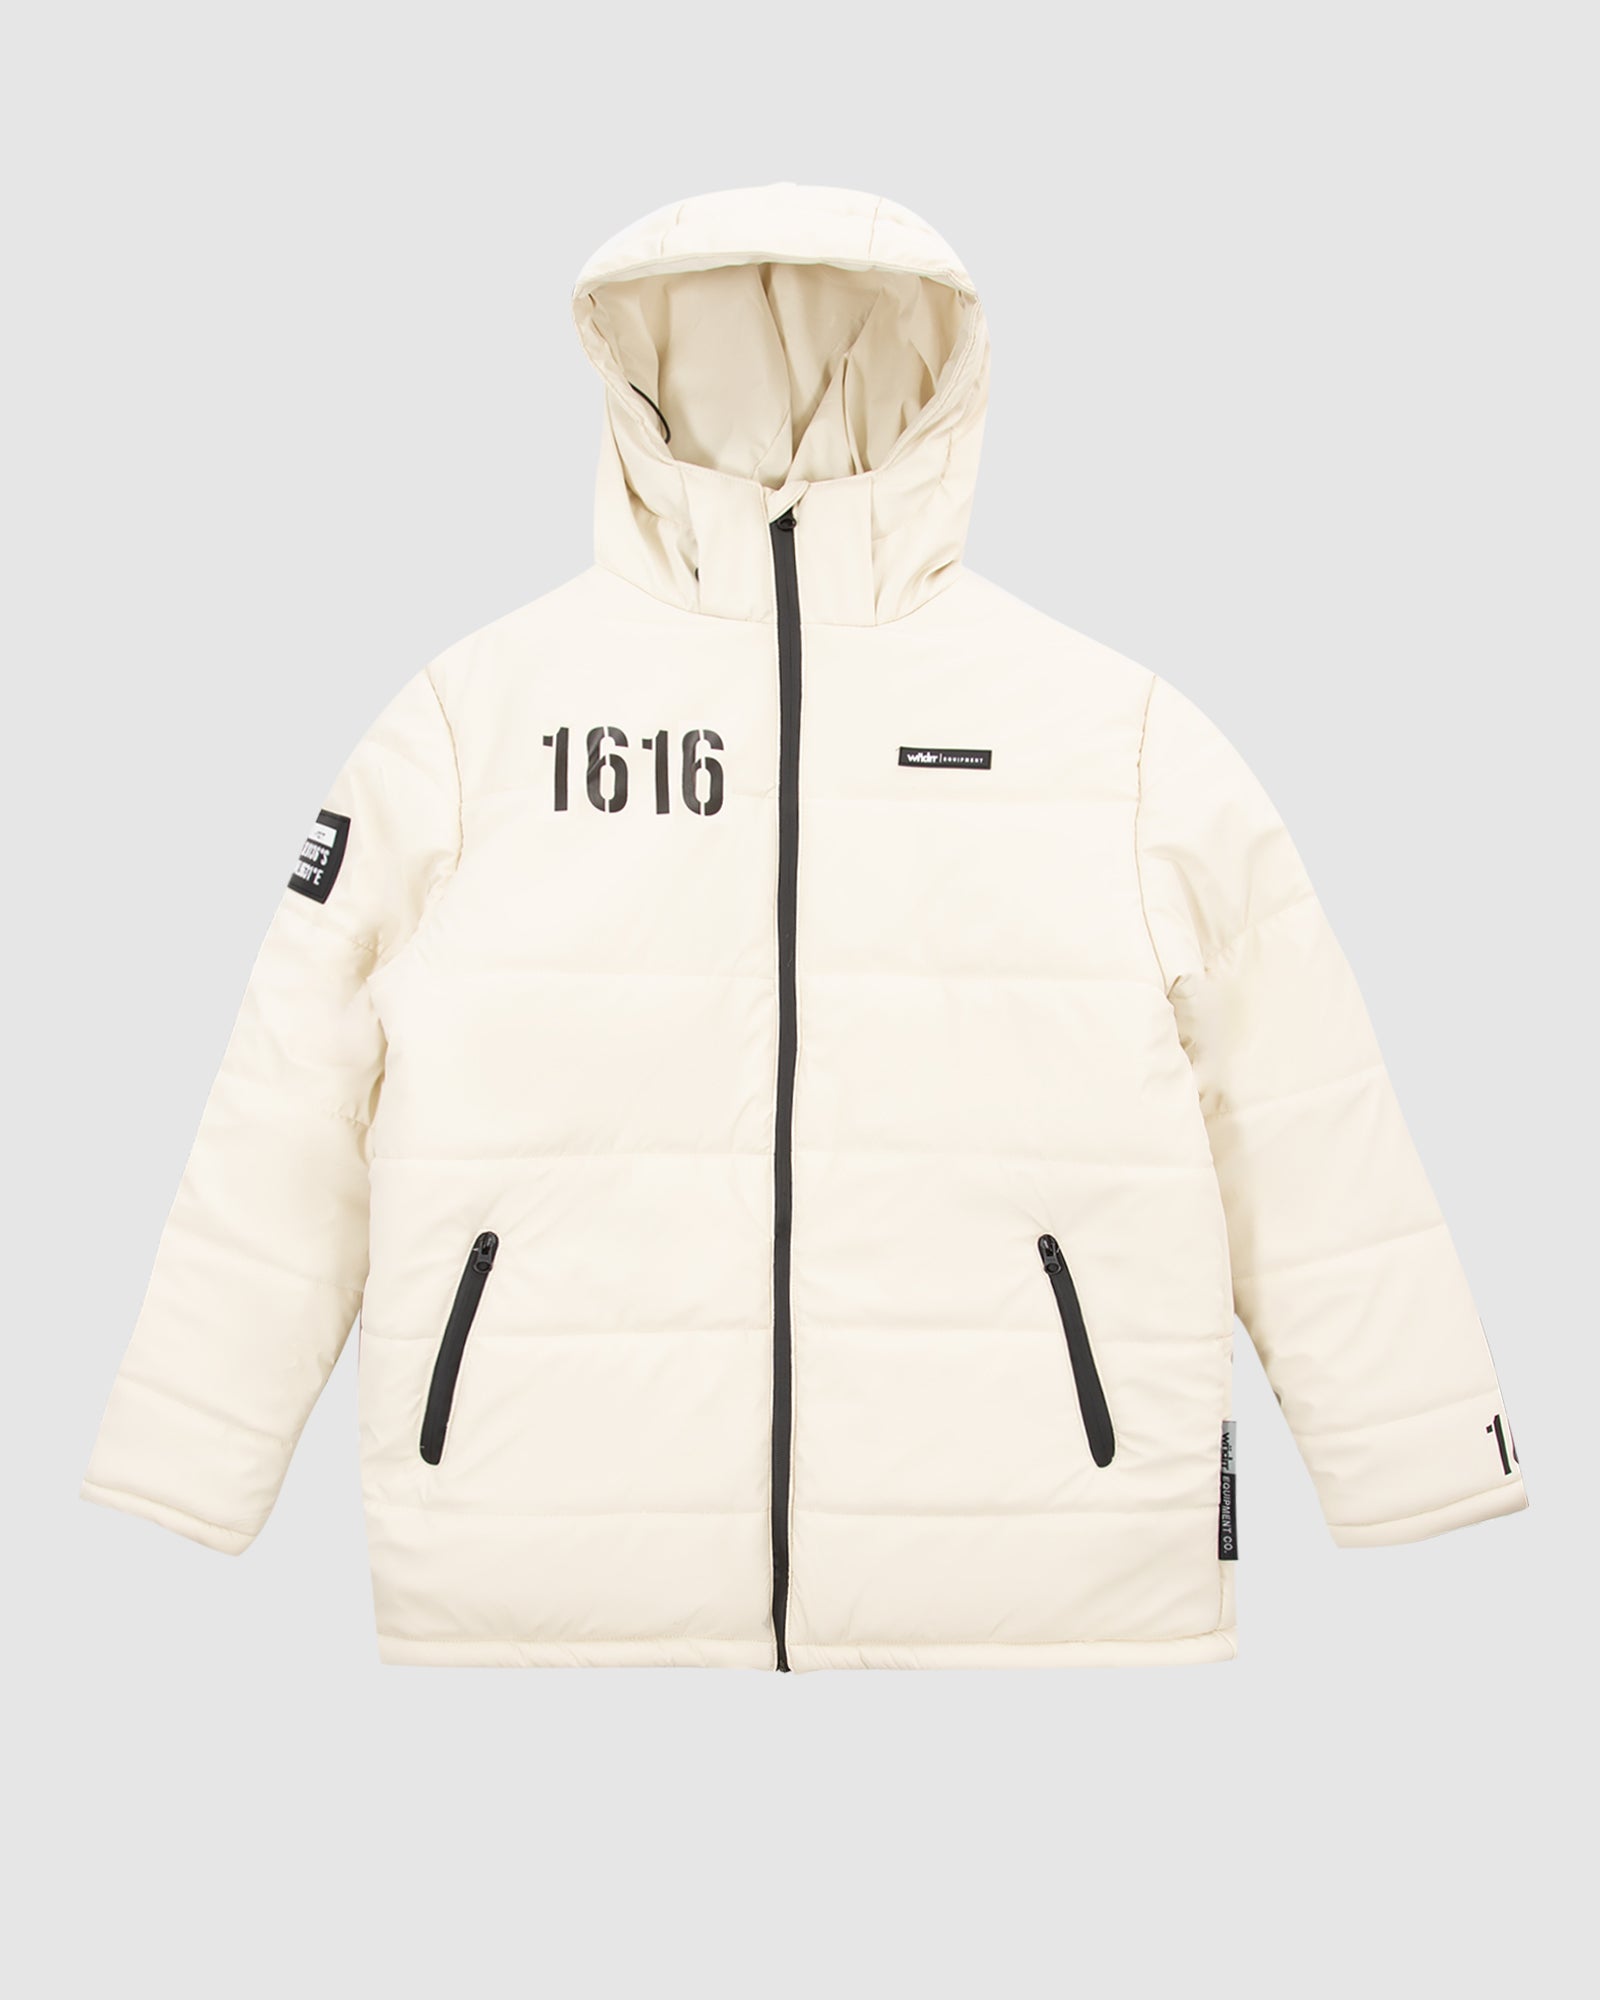 COUNT IT PUFFER JACKET - OFF WHITE